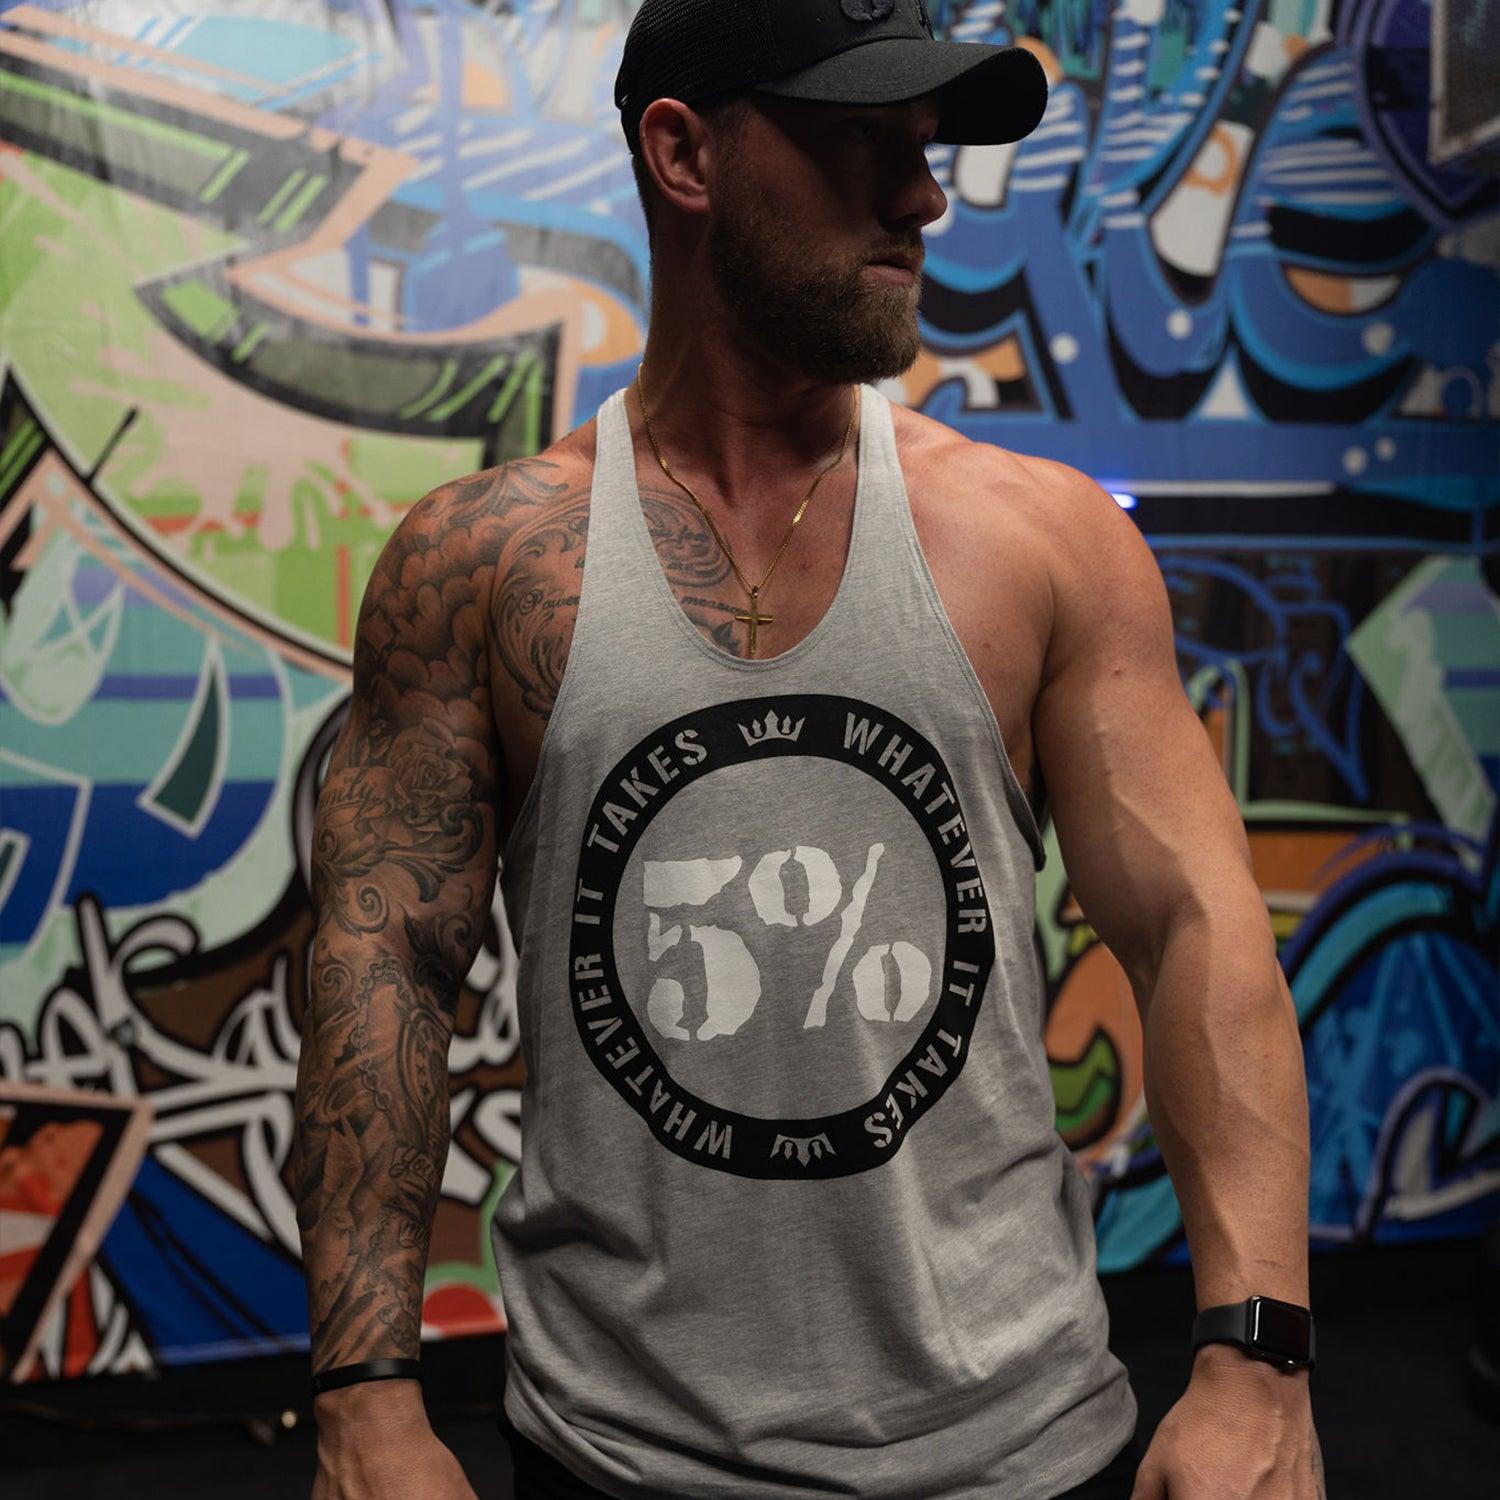 Whatever It Takes, Gray Stringer Tank with Black Lettering - 5% Nutrition